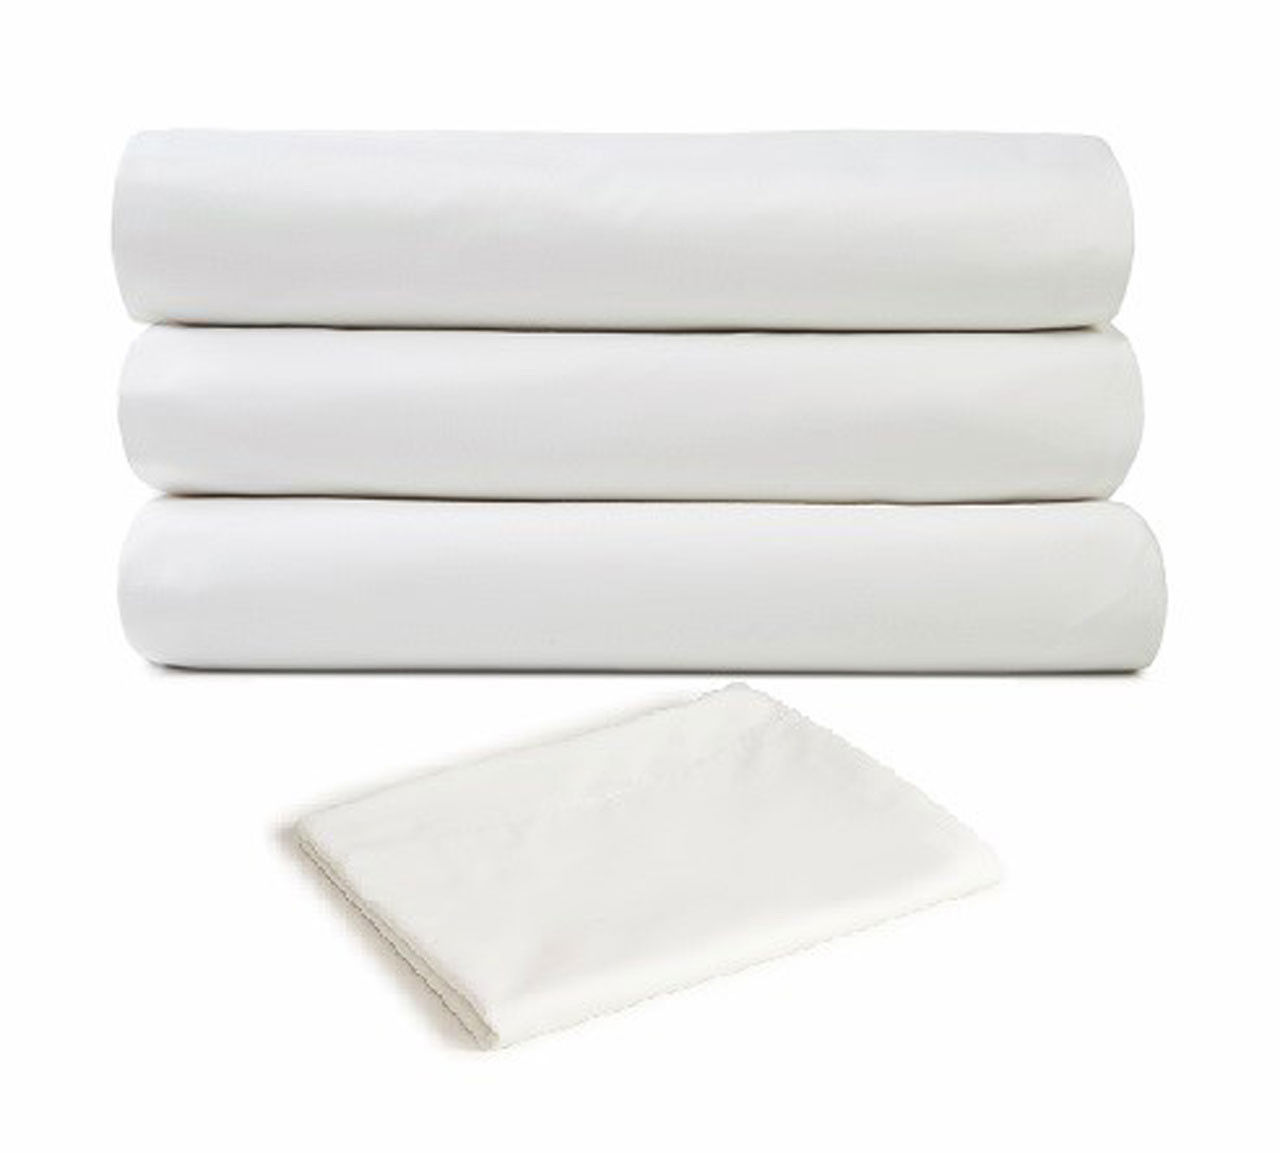 Can I buy 60/40 cotton poly blend sheets in bulk?